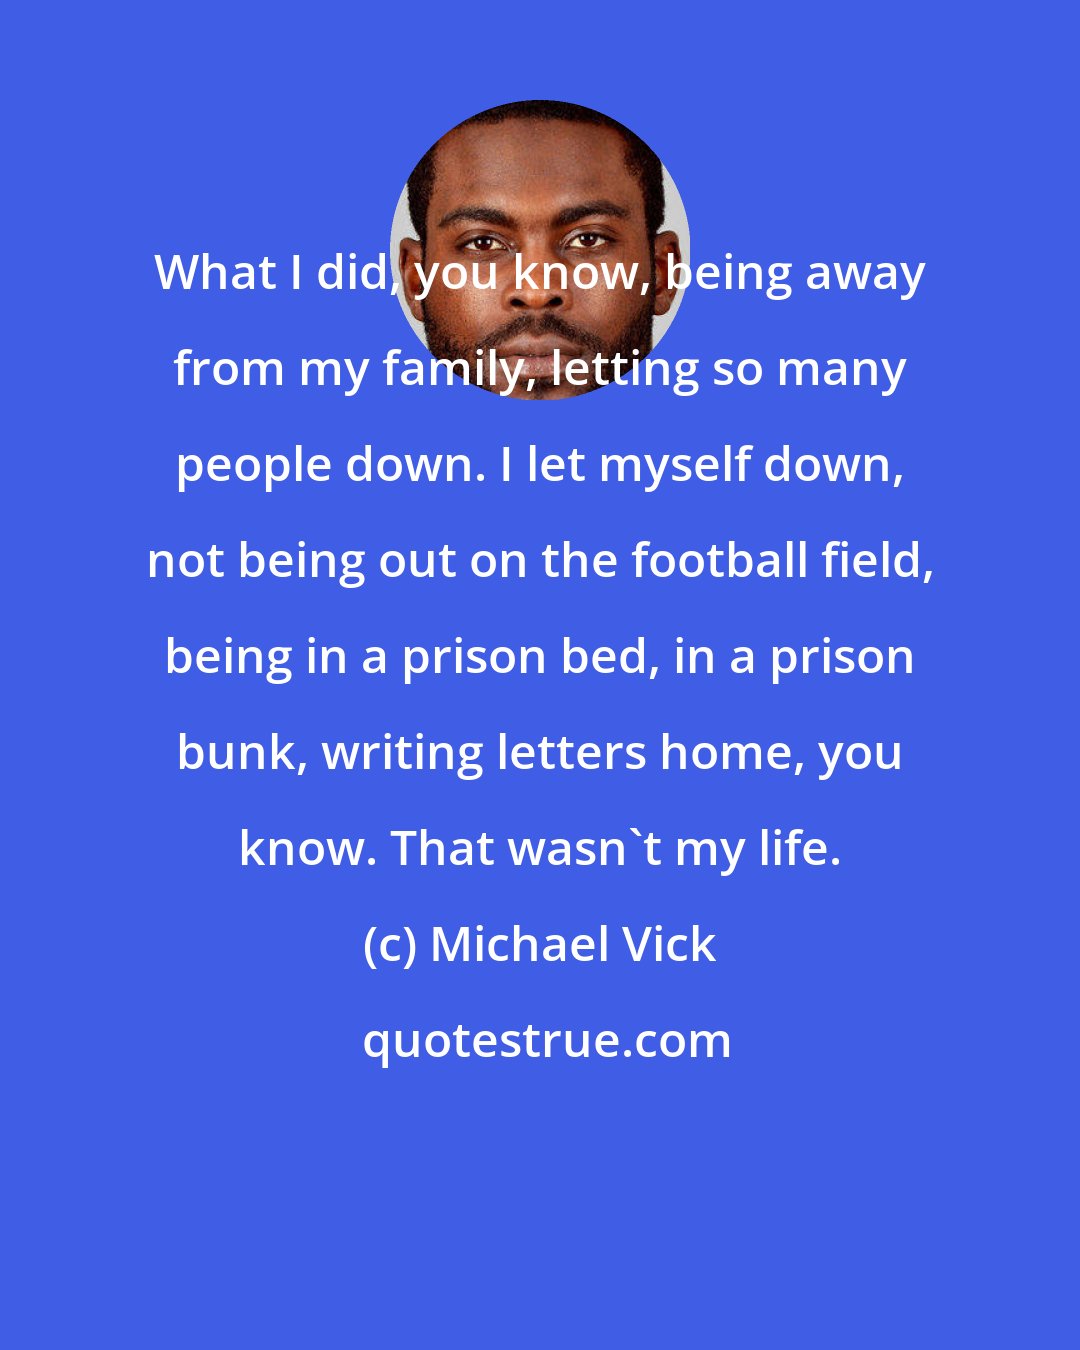 Michael Vick: What I did, you know, being away from my family, letting so many people down. I let myself down, not being out on the football field, being in a prison bed, in a prison bunk, writing letters home, you know. That wasn't my life.